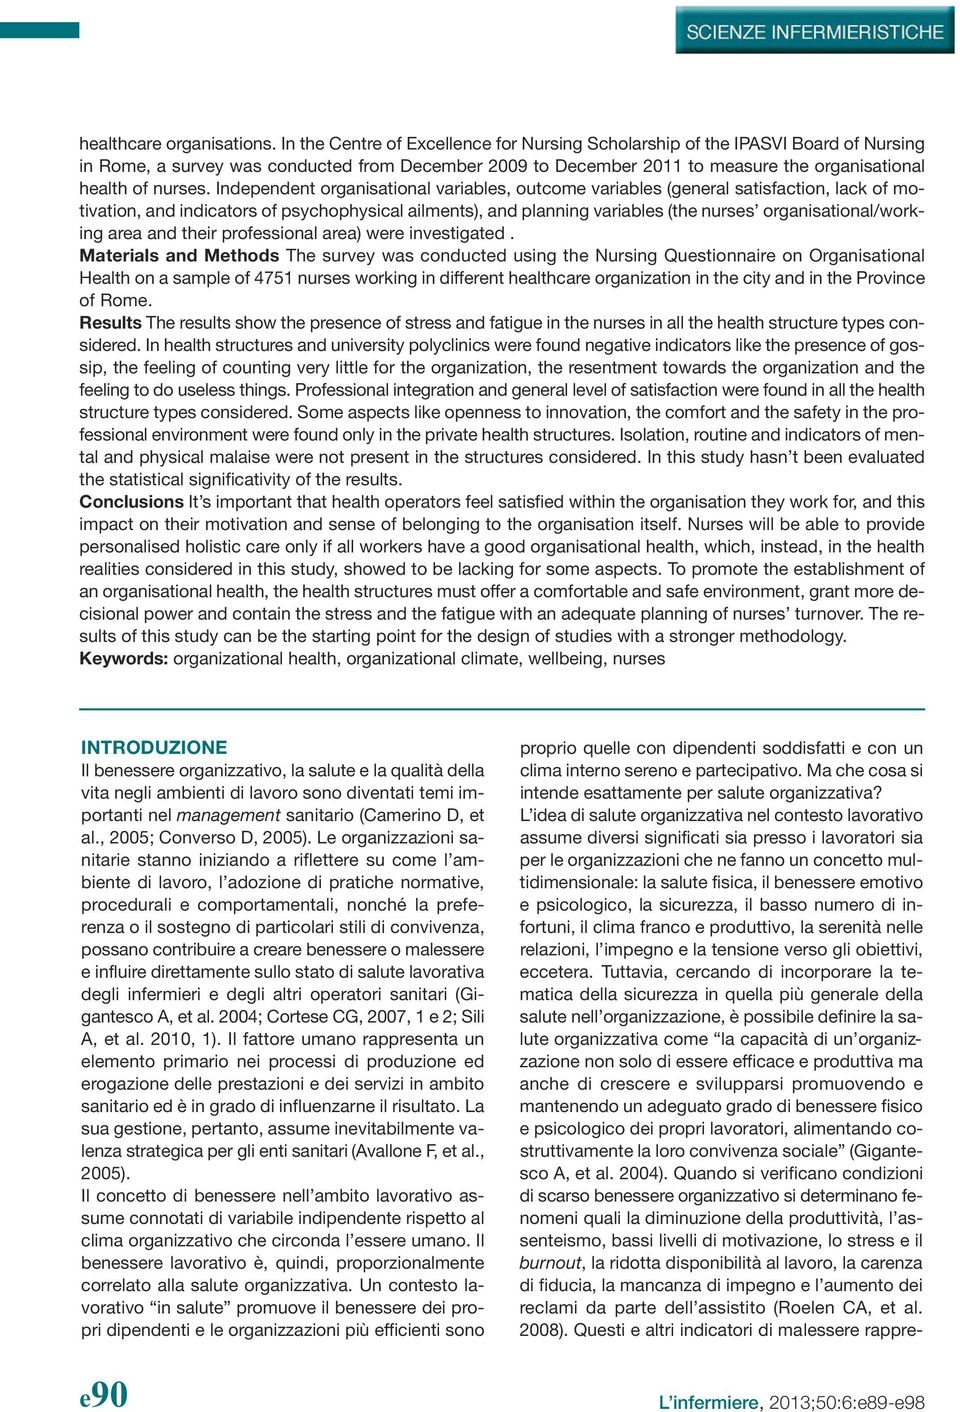 Independent organisational variables, outcome variables (general satisfaction, lack of motivation, and indicators of psychophysical ailments), and planning variables (the nurses